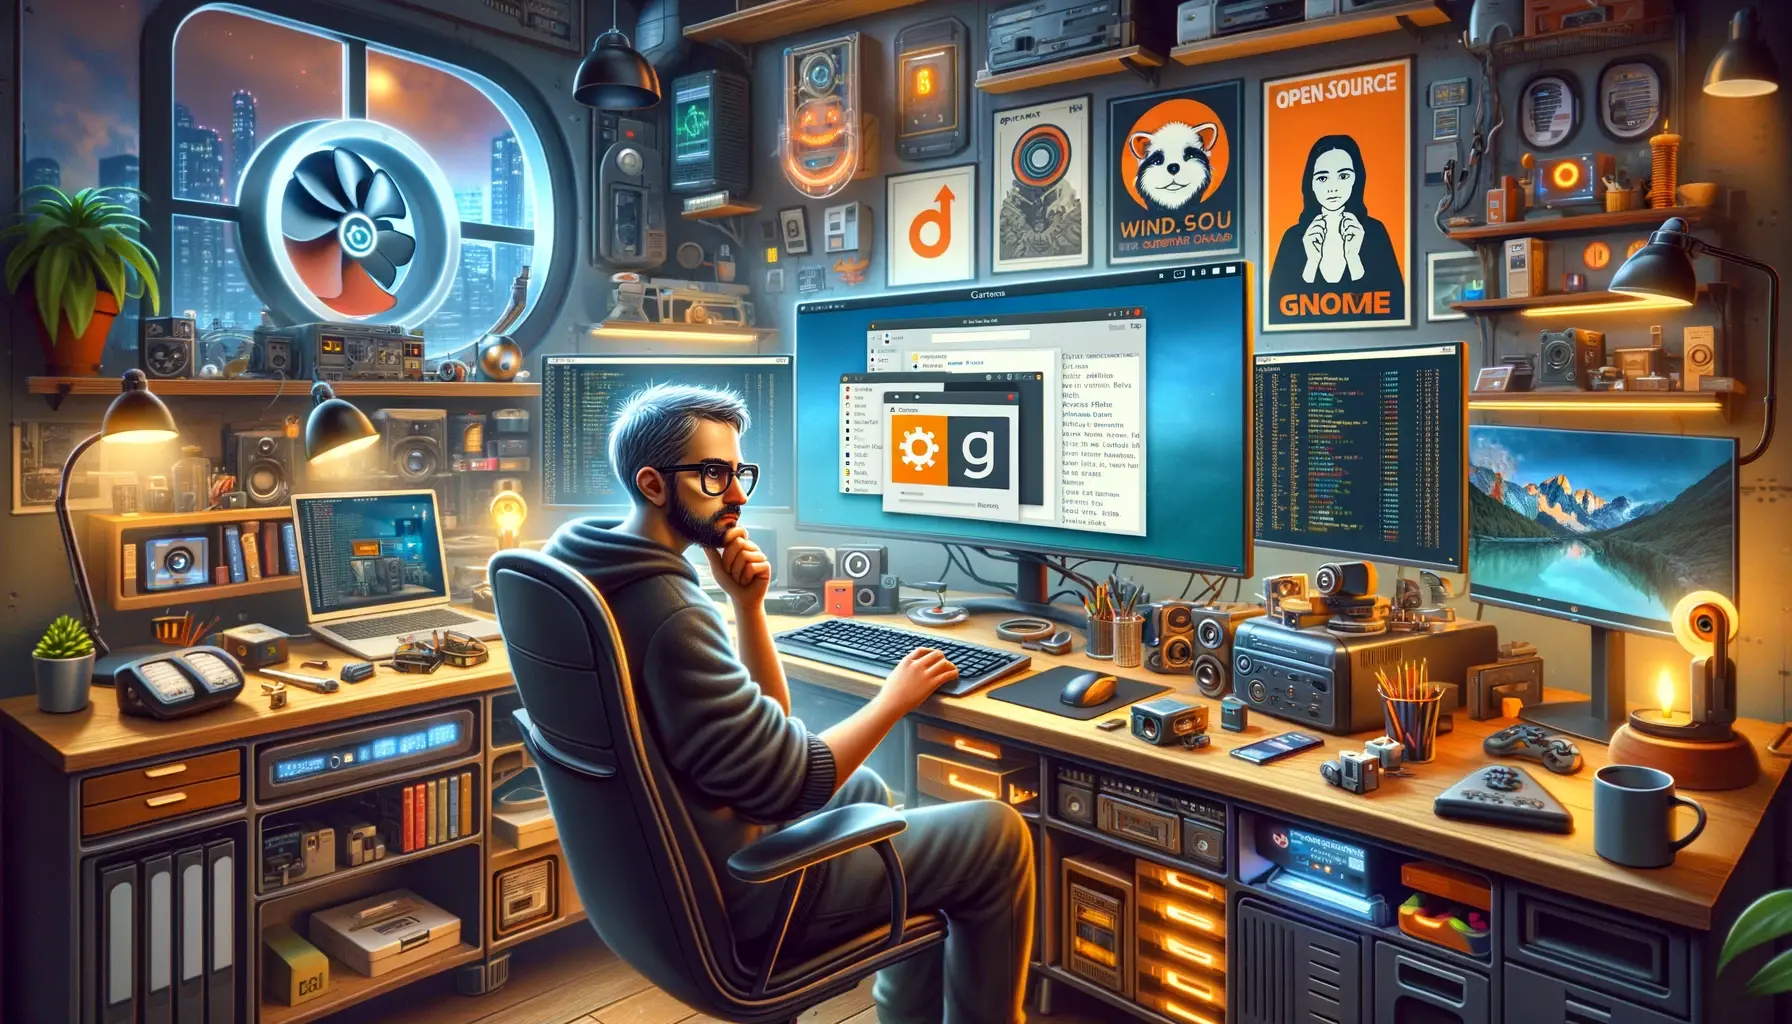 An image depicting a Linux geek in a tech-inspired room. The geek is sitting at a desk with a wide monitor, showing Ubuntu Linux with a GNOME desktop